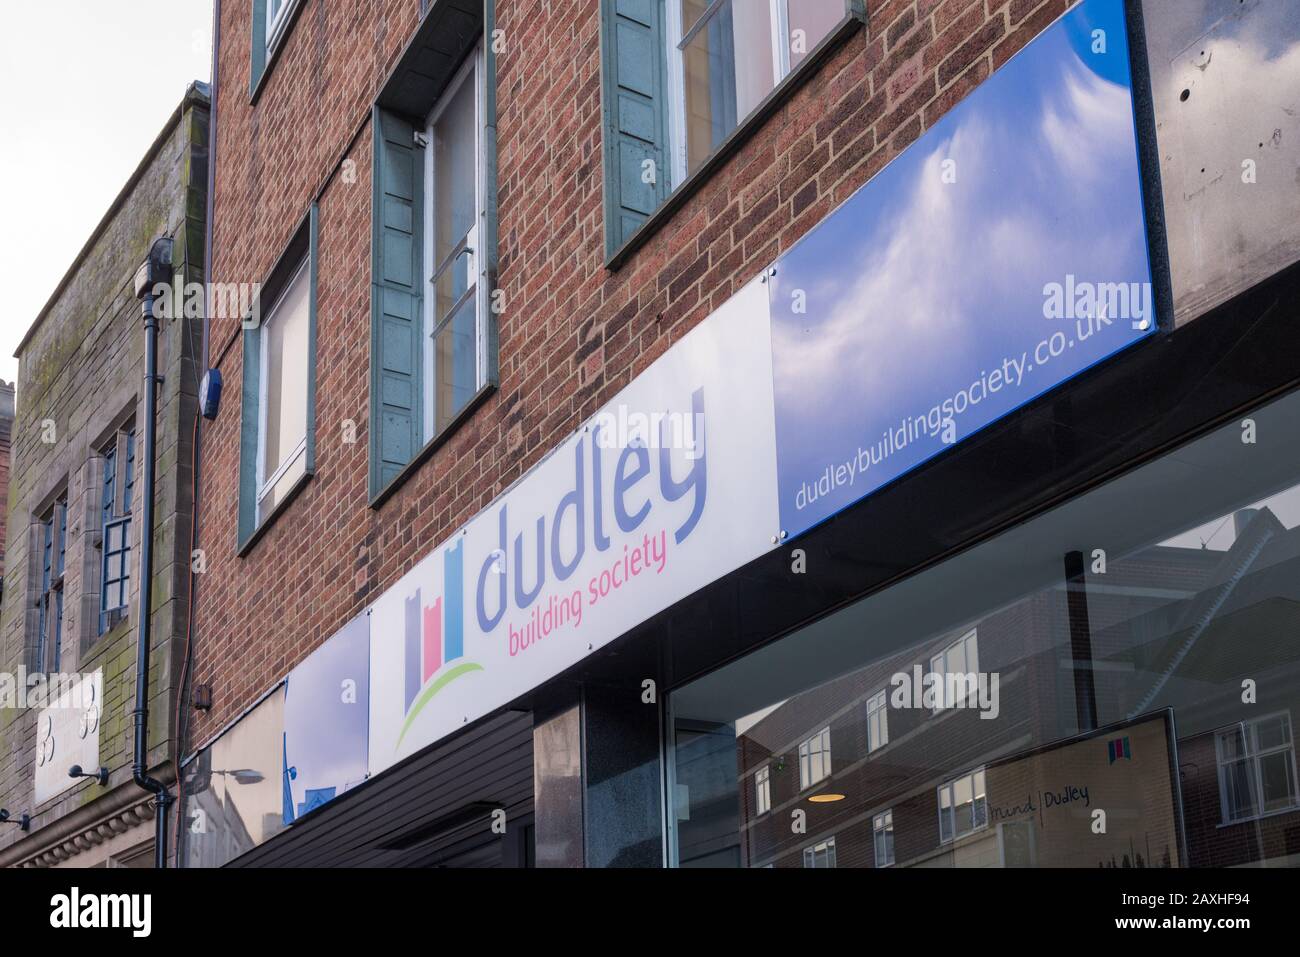 Dudley Building Society branch in Dudley, West Midlands, UK Stock Photo